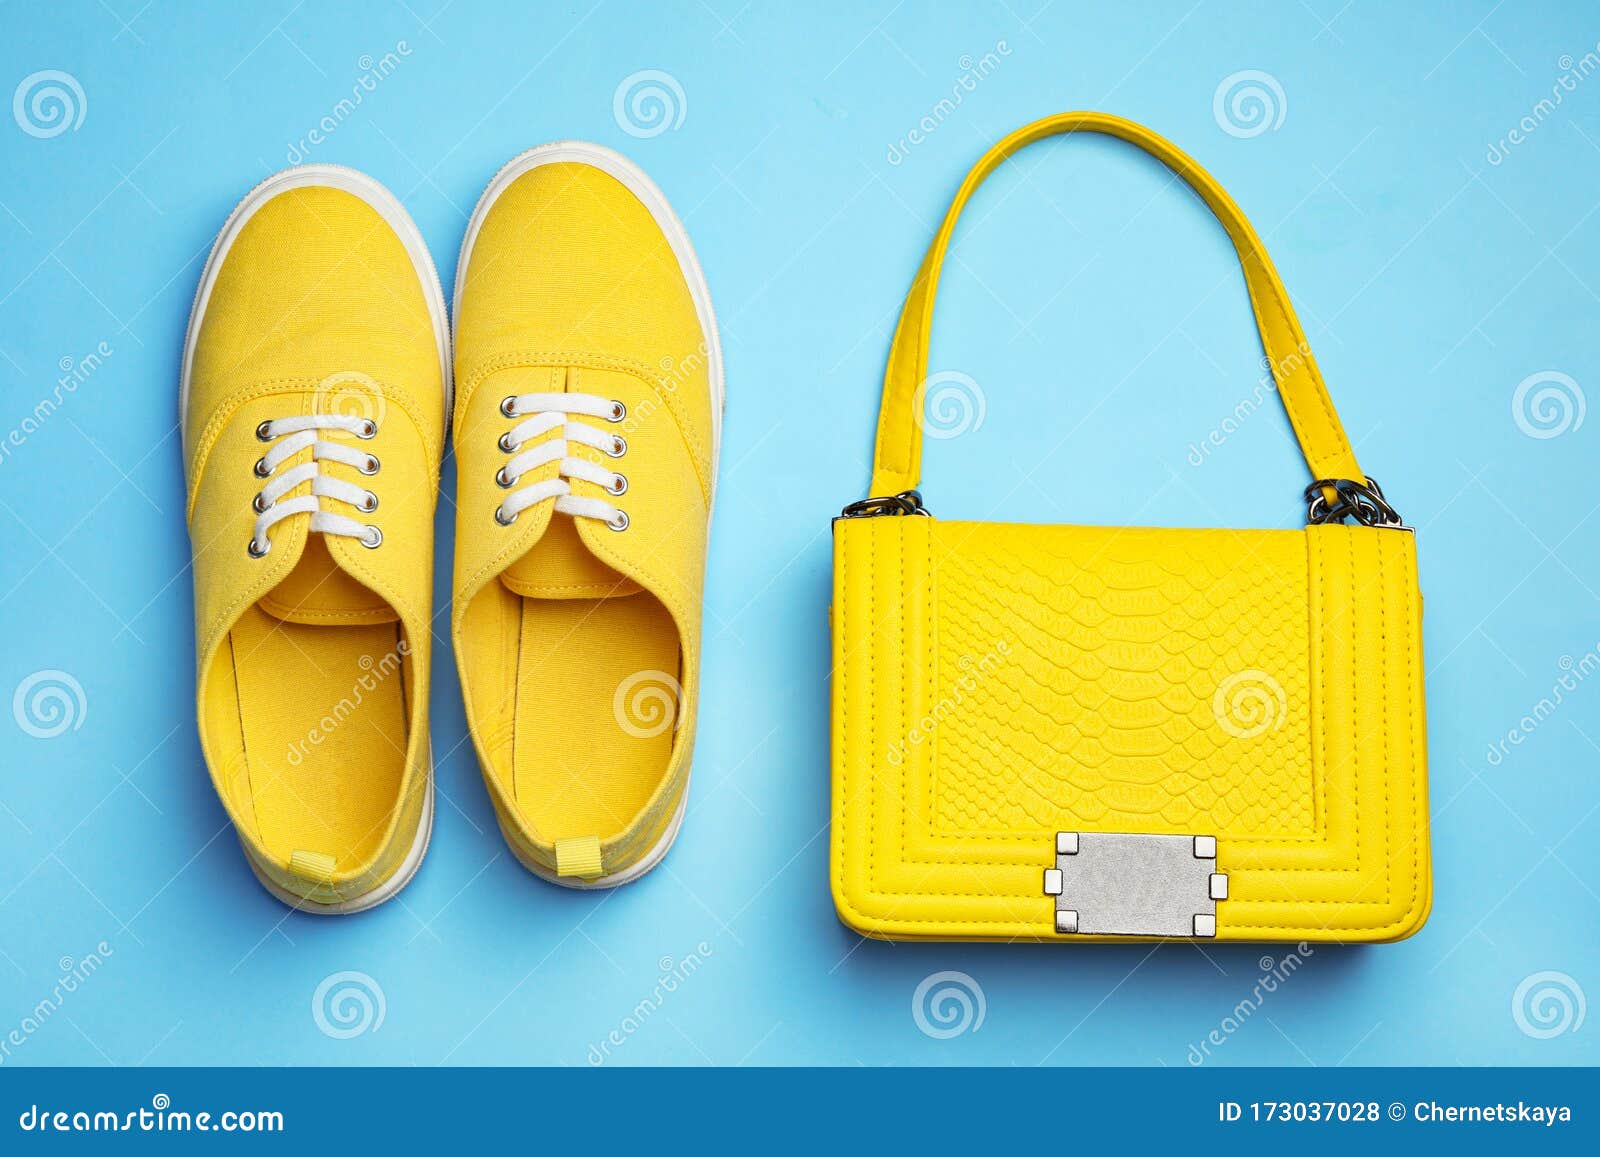 light blue shoes and bag